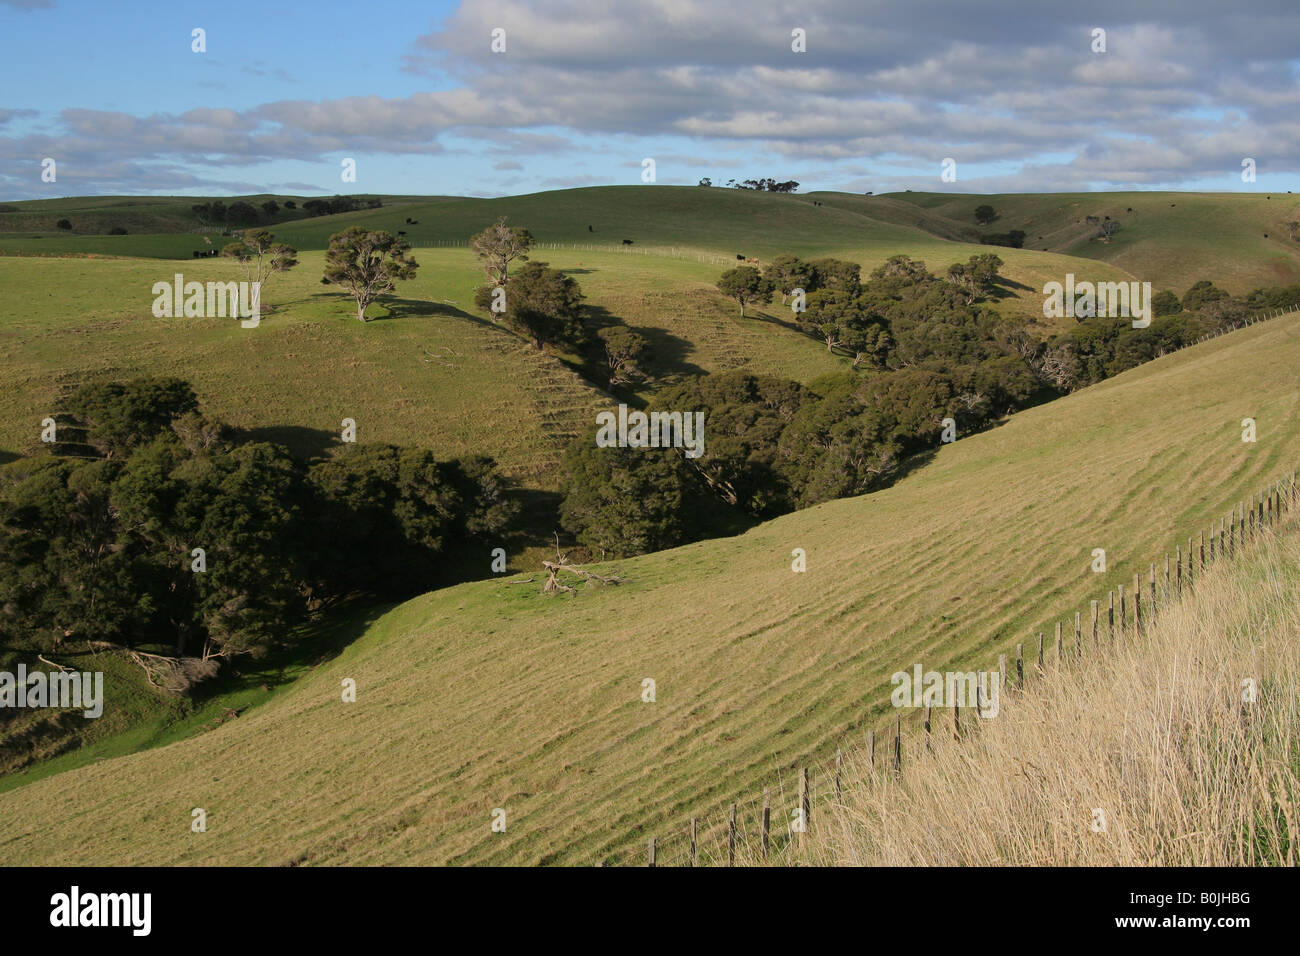 Farm land gully with trees in evening sun. Stock Photo